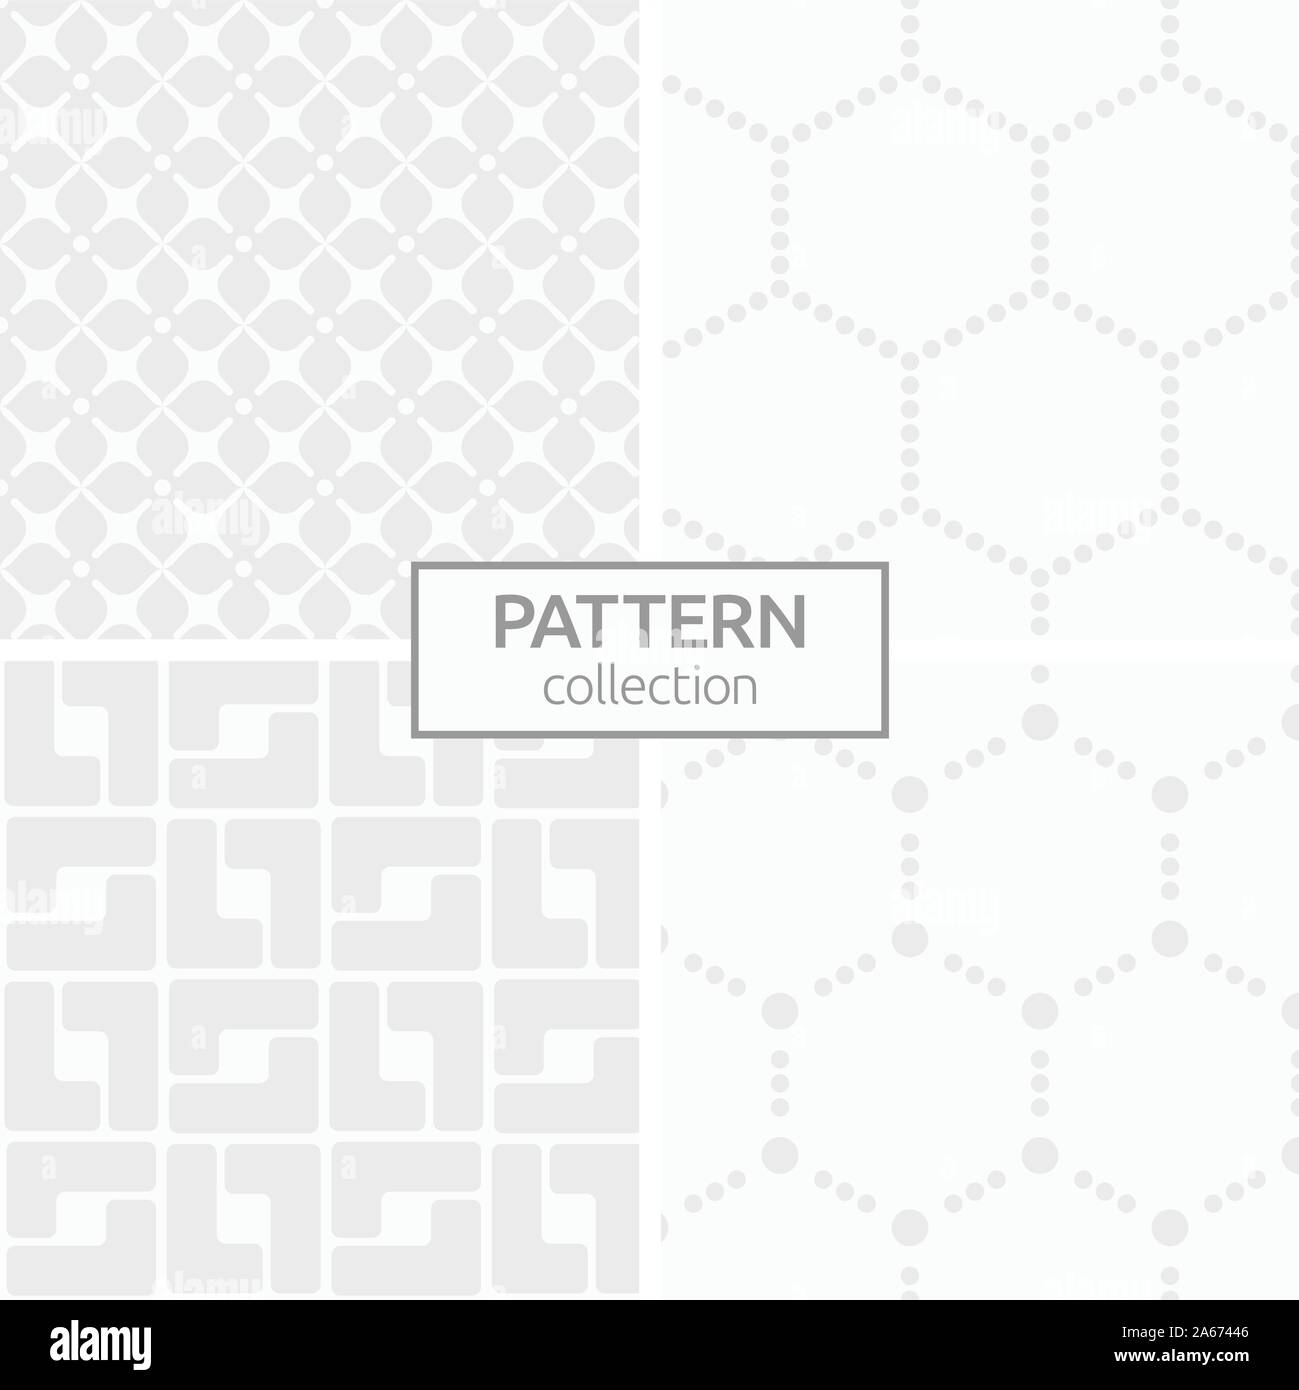 Set of four abstract geometric seamless patterns. Modern stylish backgrounds. White and gray geometric textures. Dotted hexagons, stylized flowers. Stock Vector